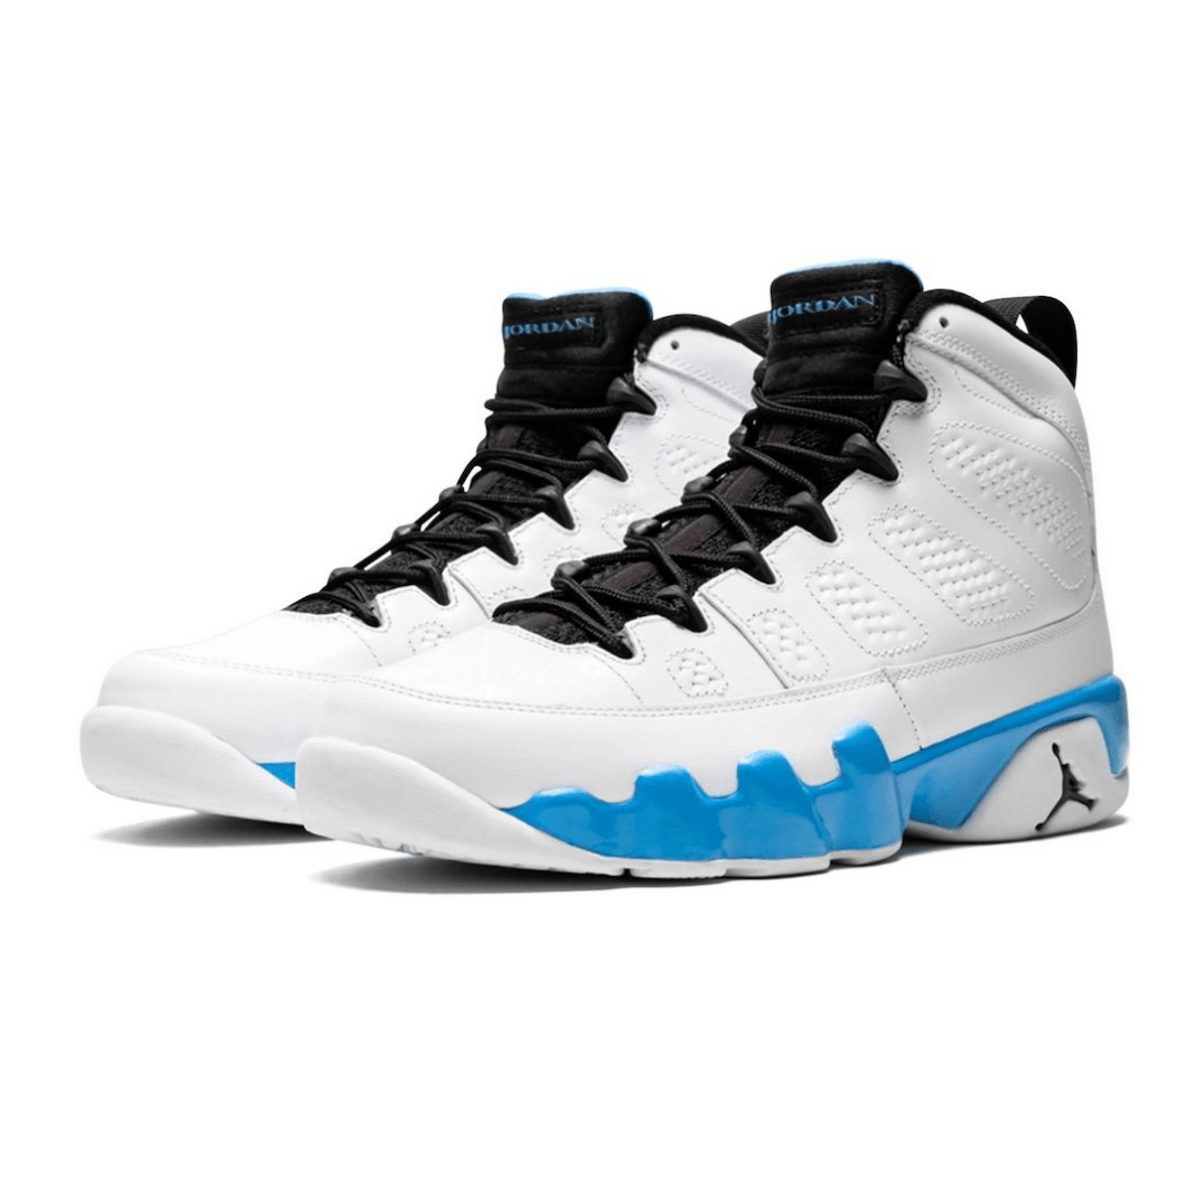 Powder Up Your Sneaker Rotation With The Air Jordan 9 OG Powder Blue